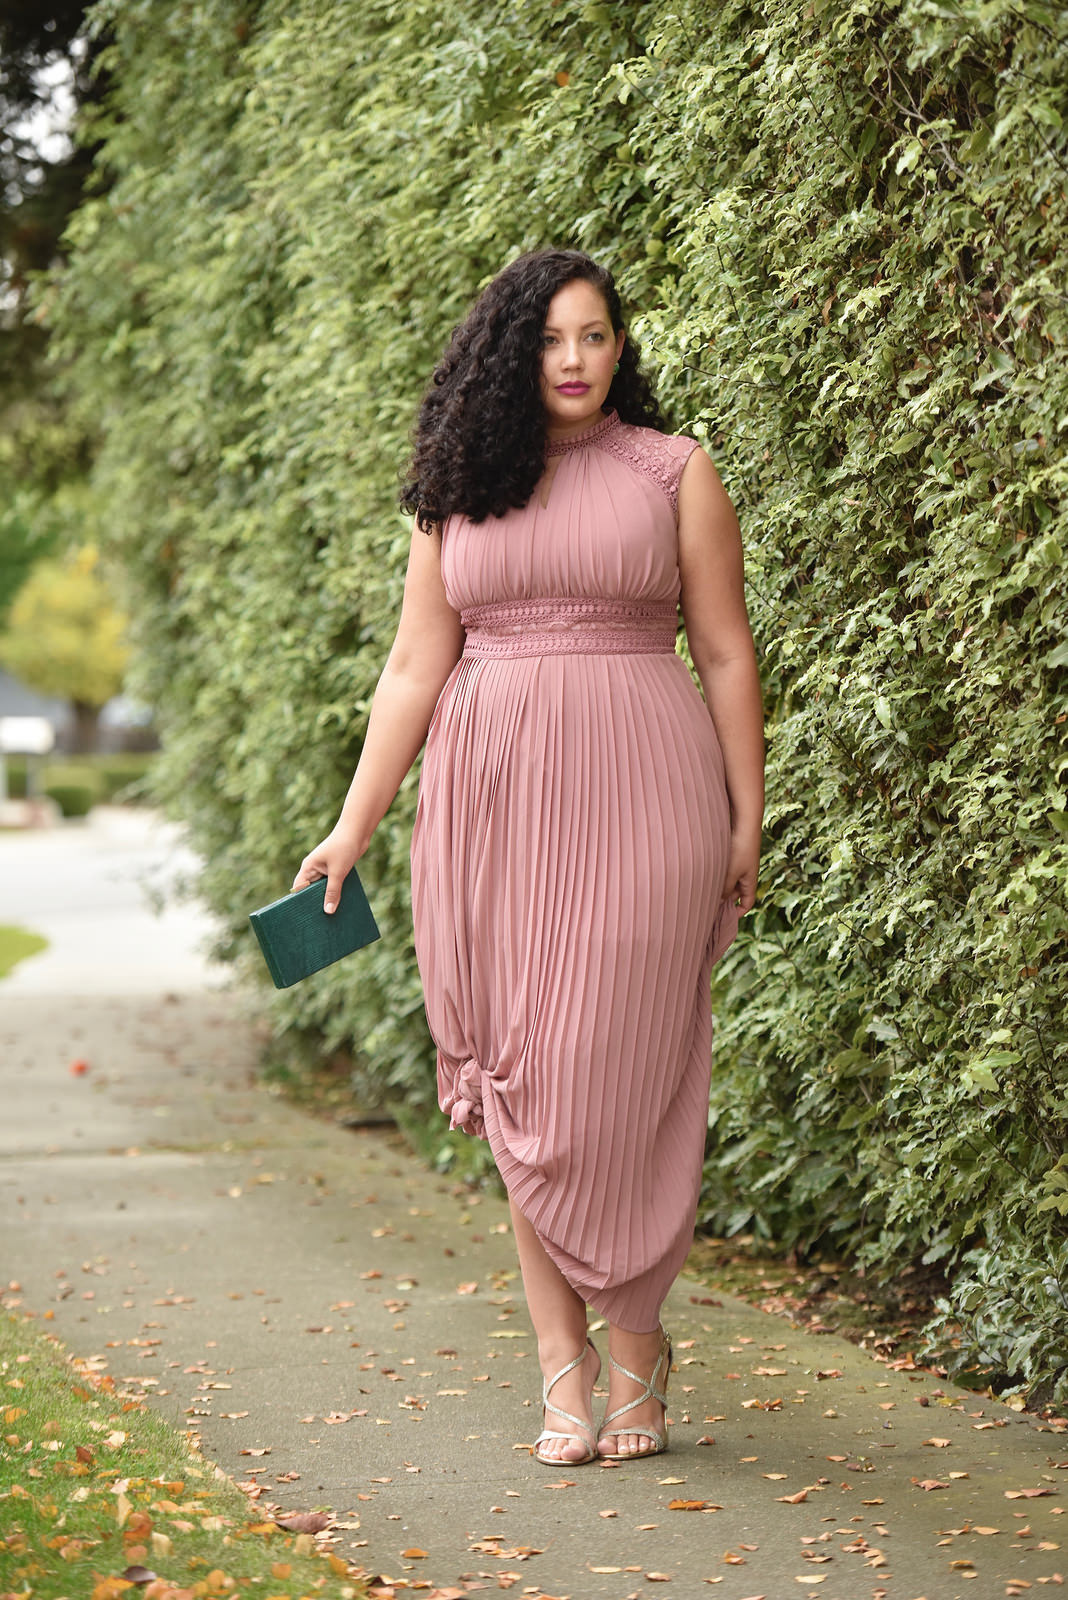 Girl With Curves blogger Tanesha Awasthi wears a lace detail plus size maxi dress and emerald accessories.